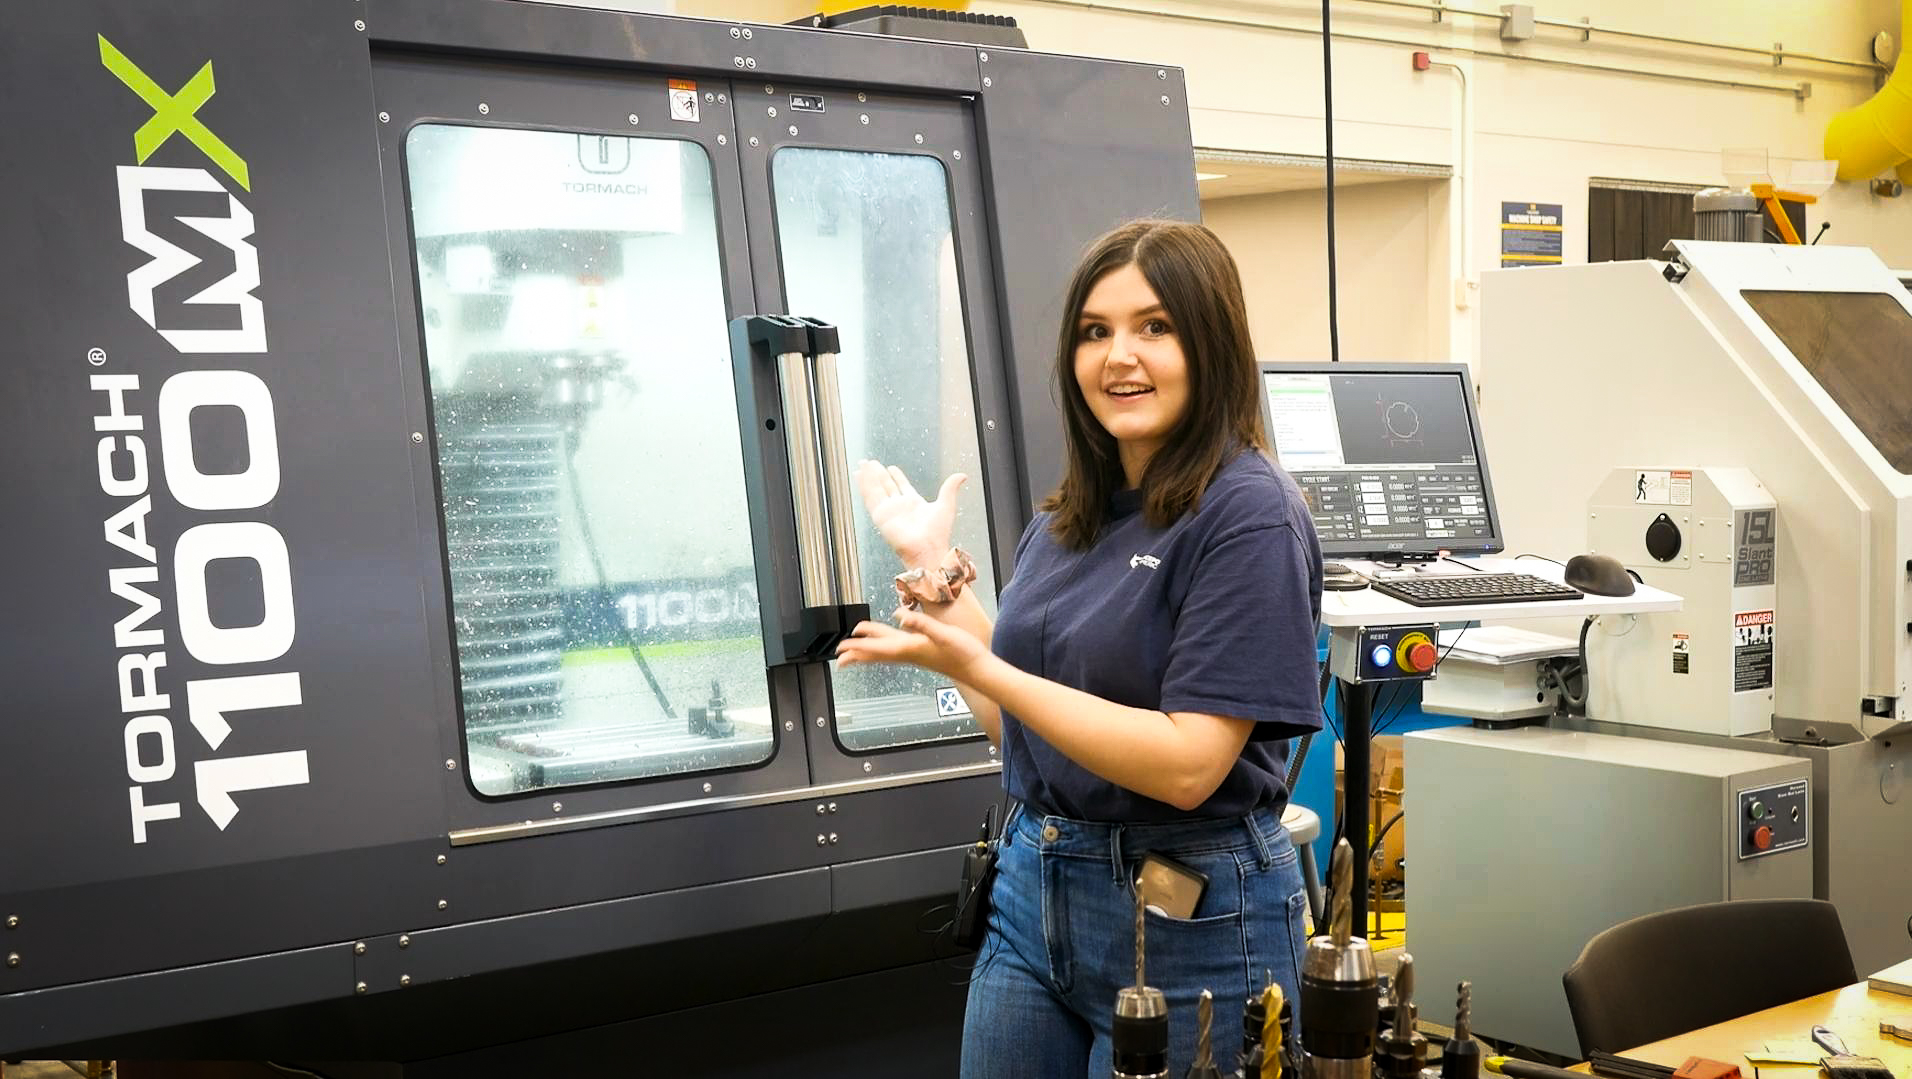 Mechanical engineering senior Sierra Stockwell stands next to the Tormach CNC mill, one of her favorite tools in the MSEL.